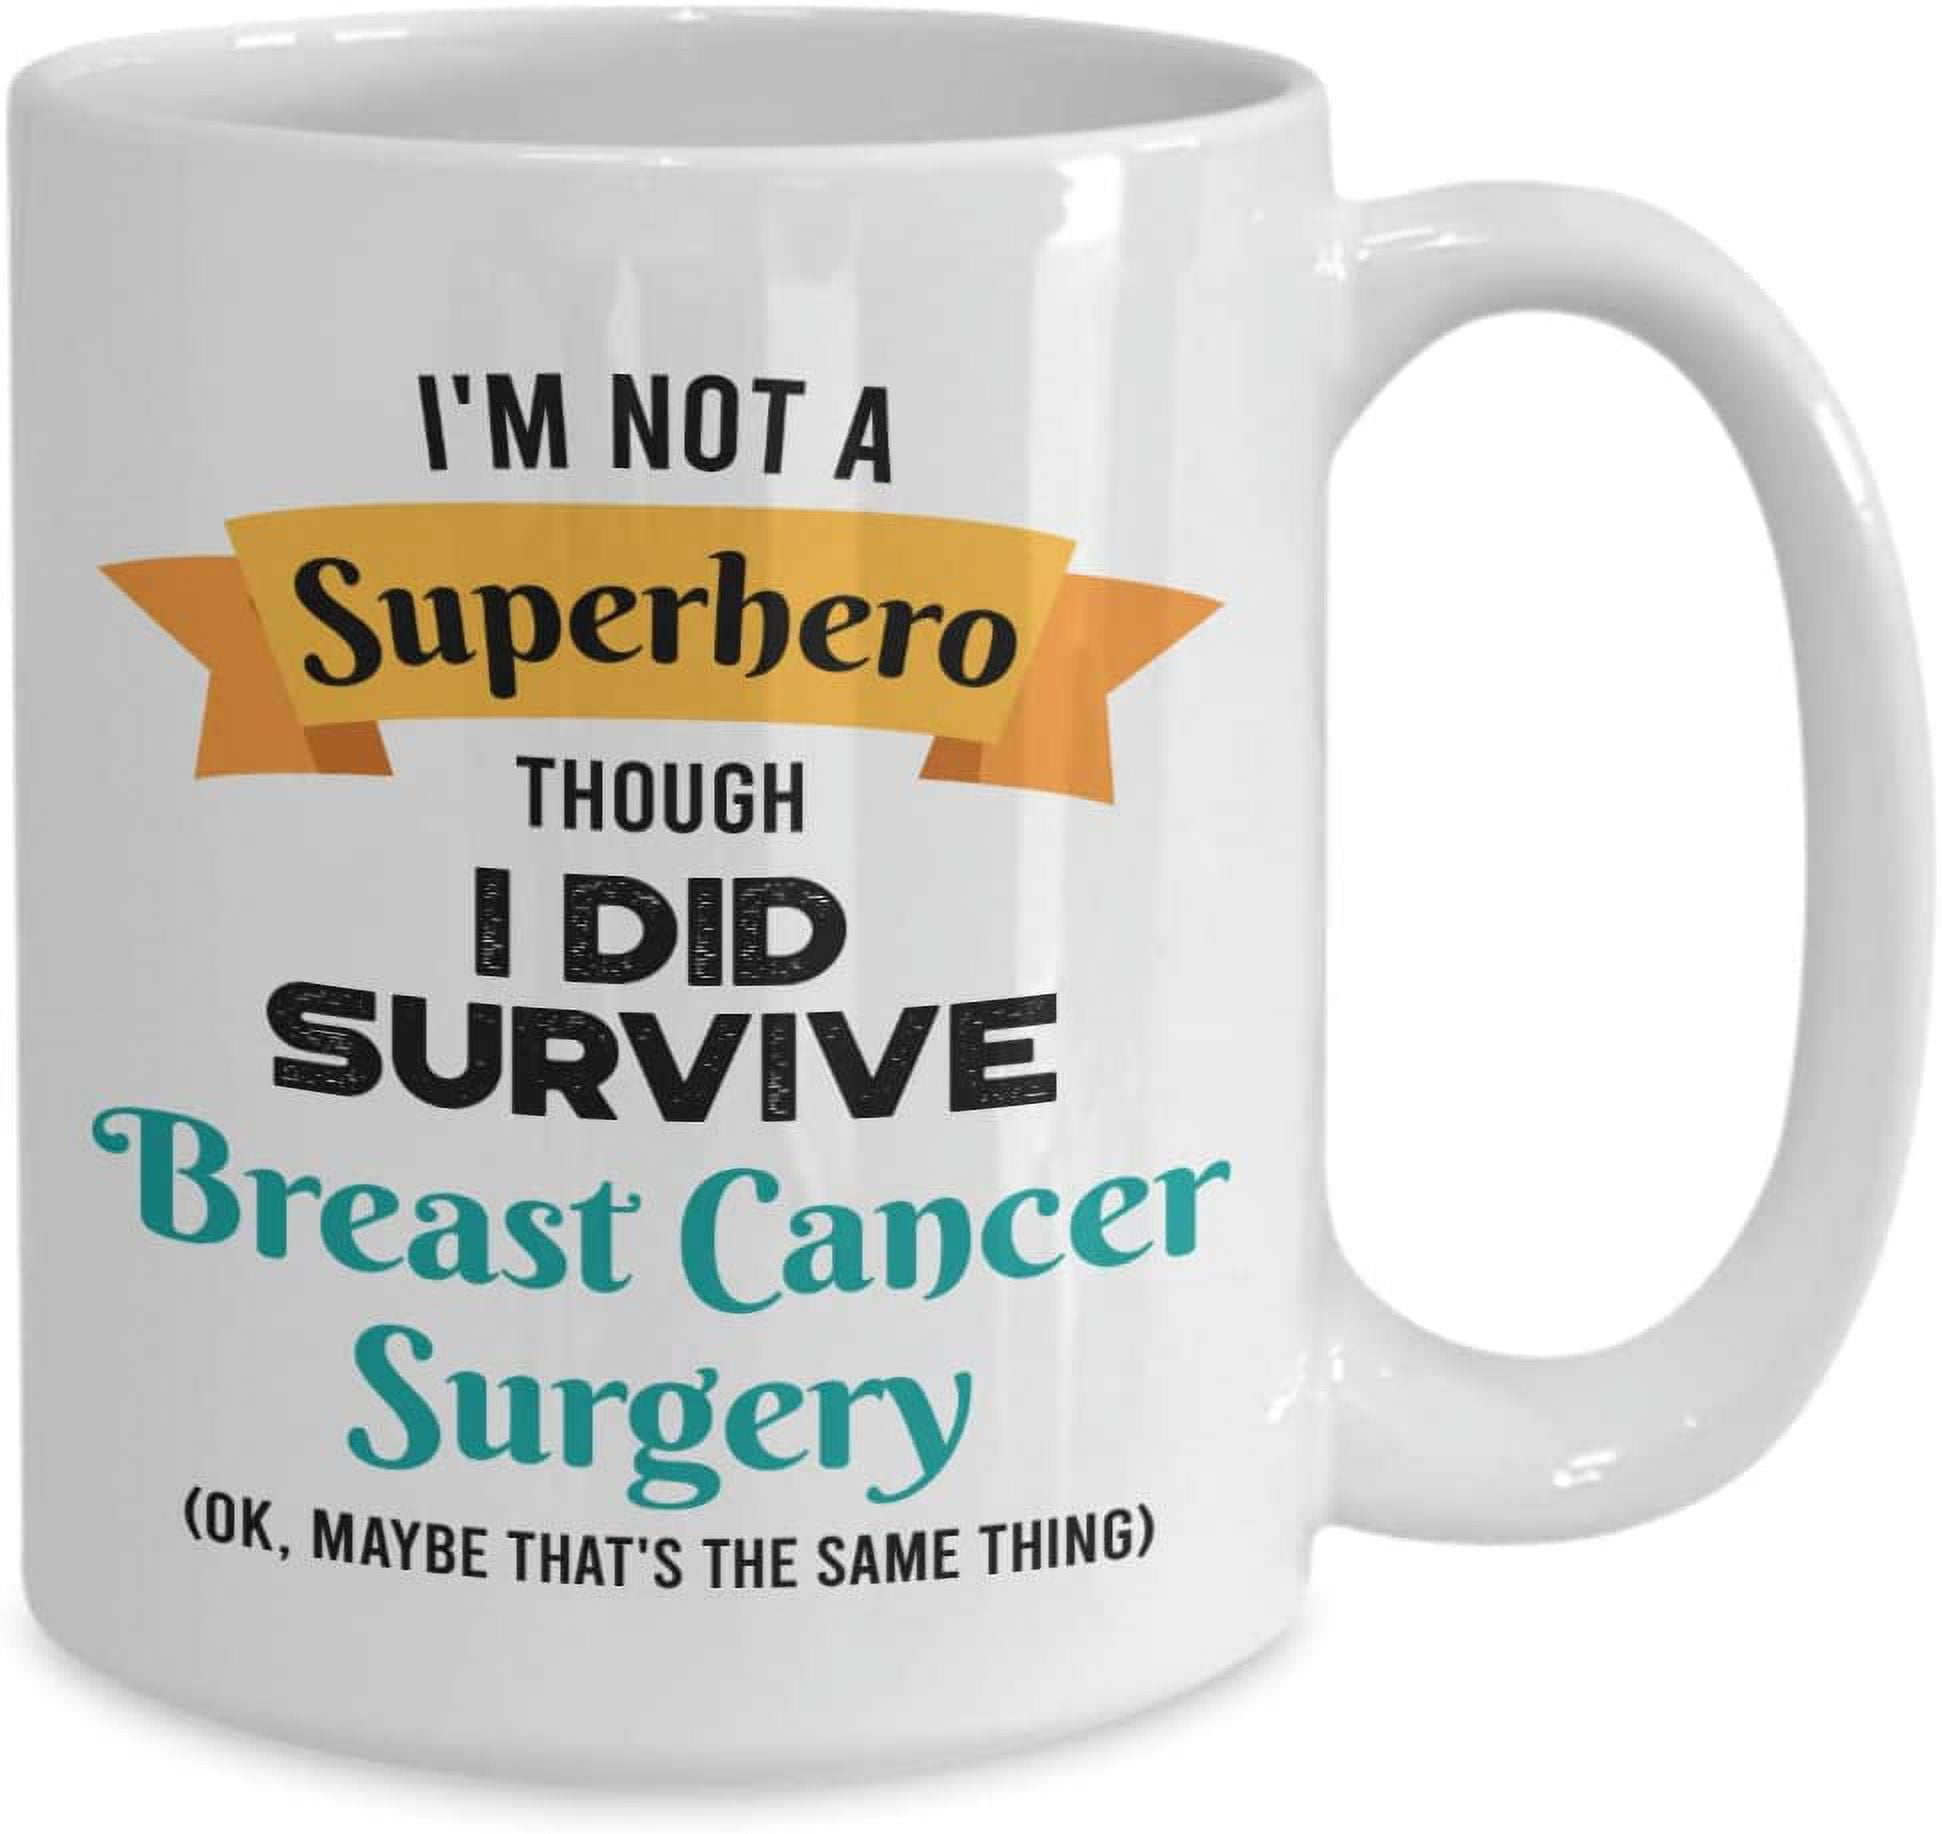 Swig founder and breast cancer survivor creates “Save the Cups